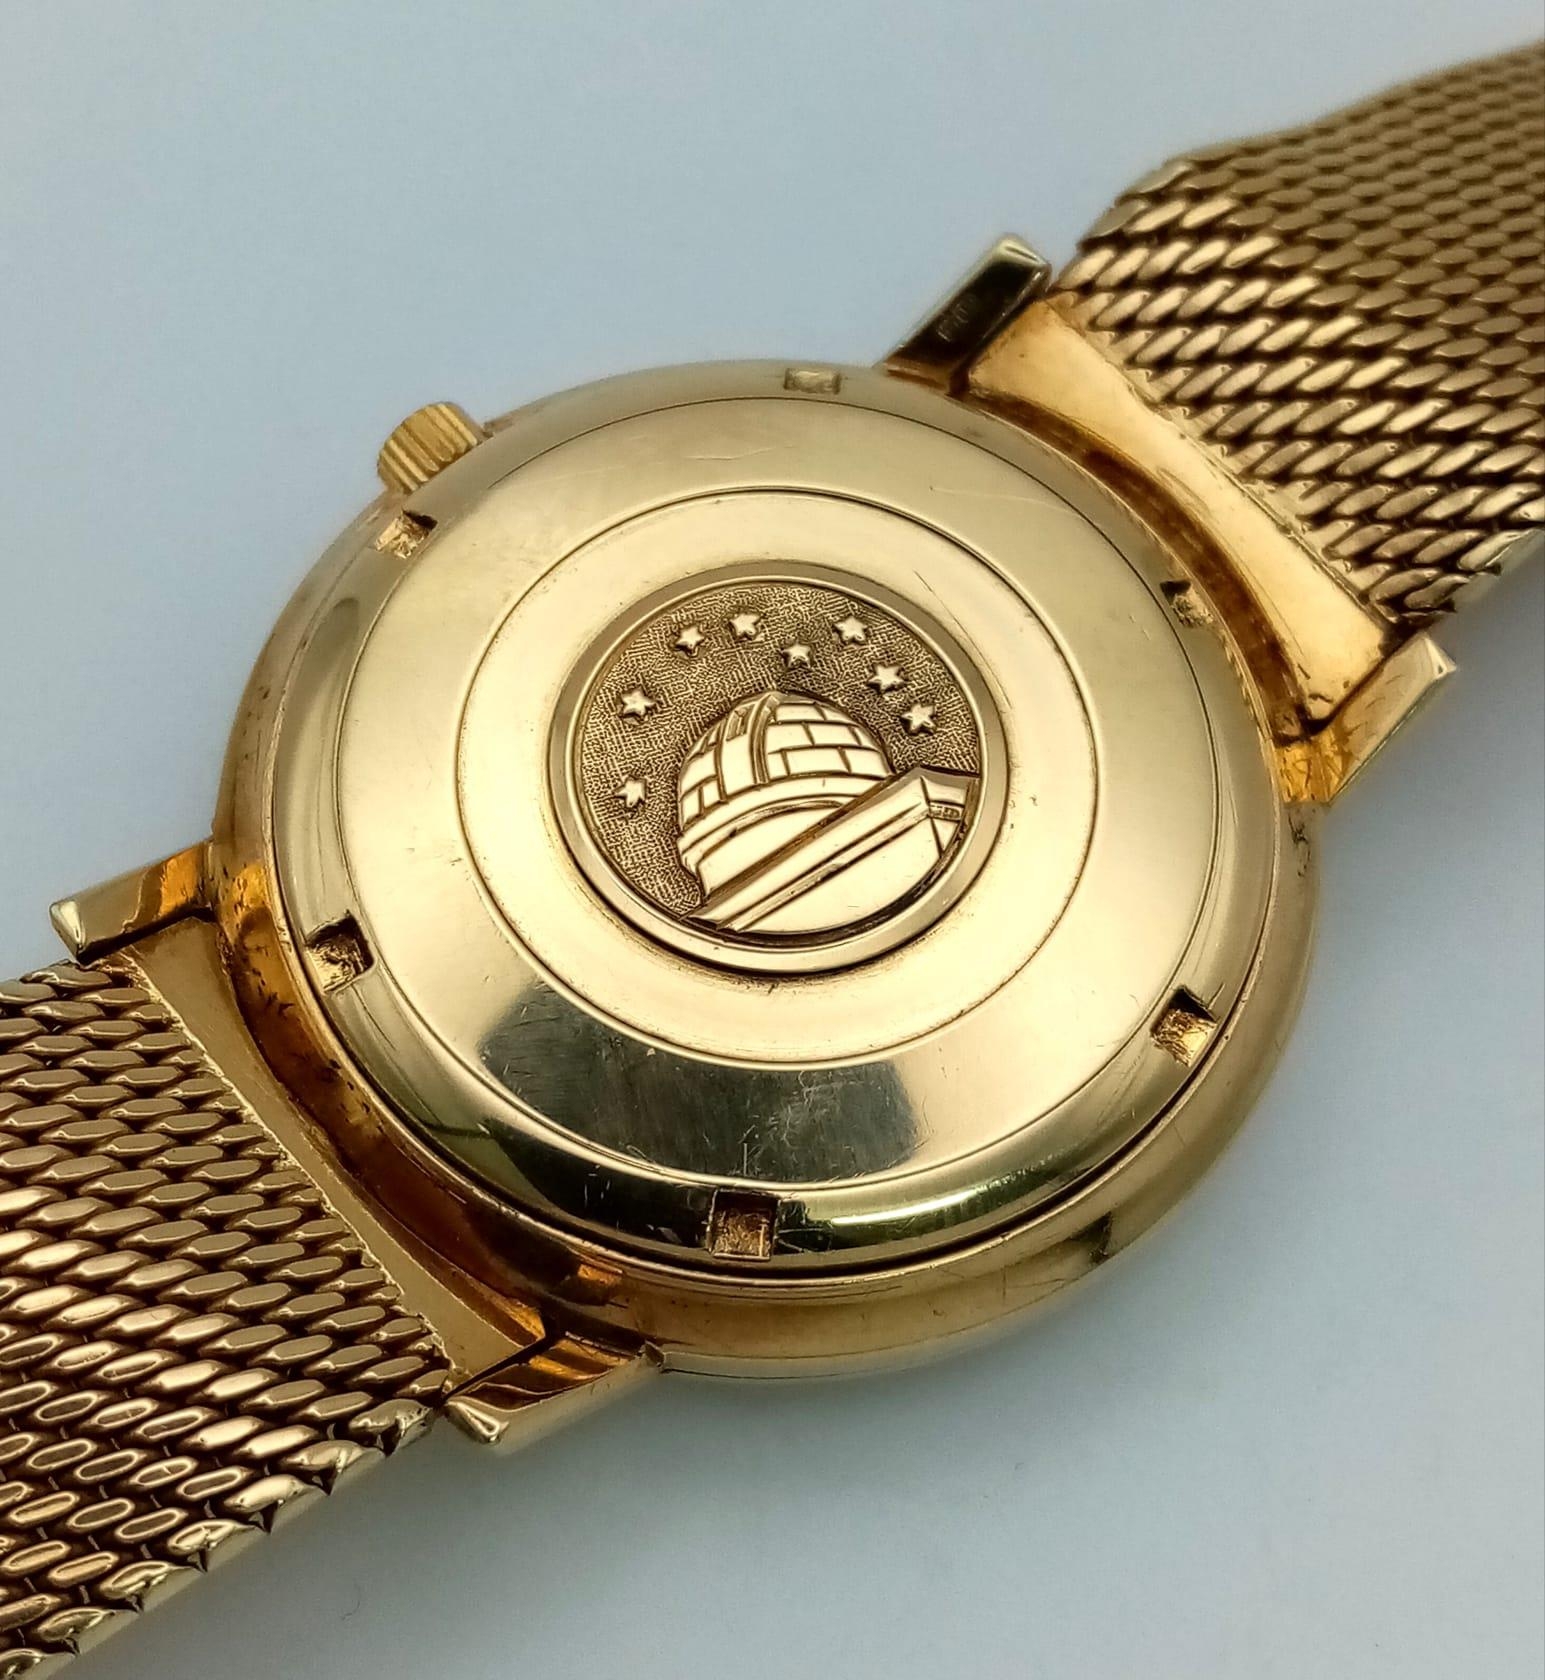 A 1960s 18K Solid Gold Omega Constellation Gents Watch. 18K gold strap and case - 36mm. White dial - Image 6 of 8